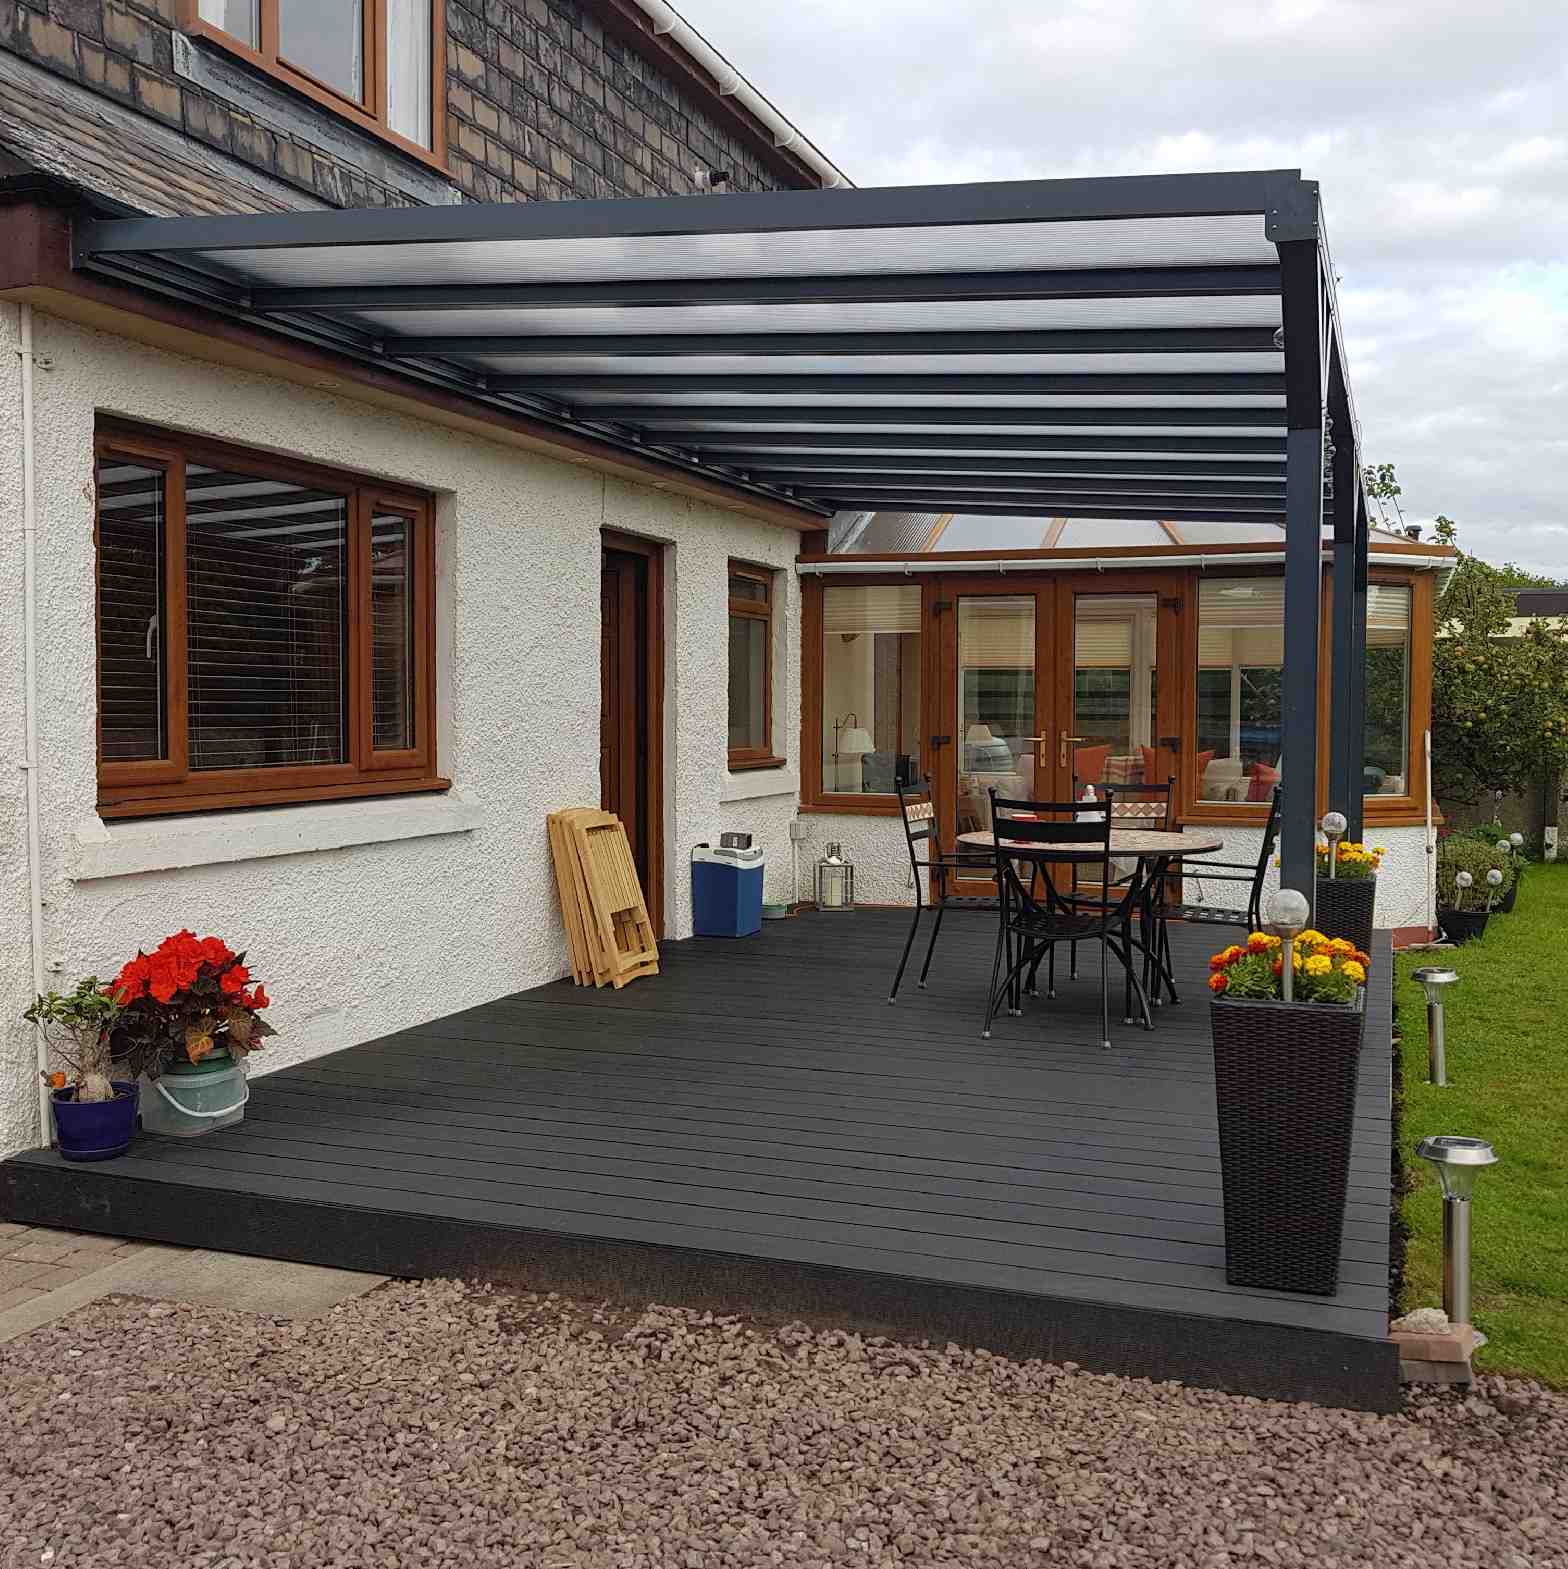 Buy Omega Verandah, Anthracite Grey, 16mm Polycarbonate Glazing - 6.3m (W) x 2.5m (P), (4) Supporting Posts online today